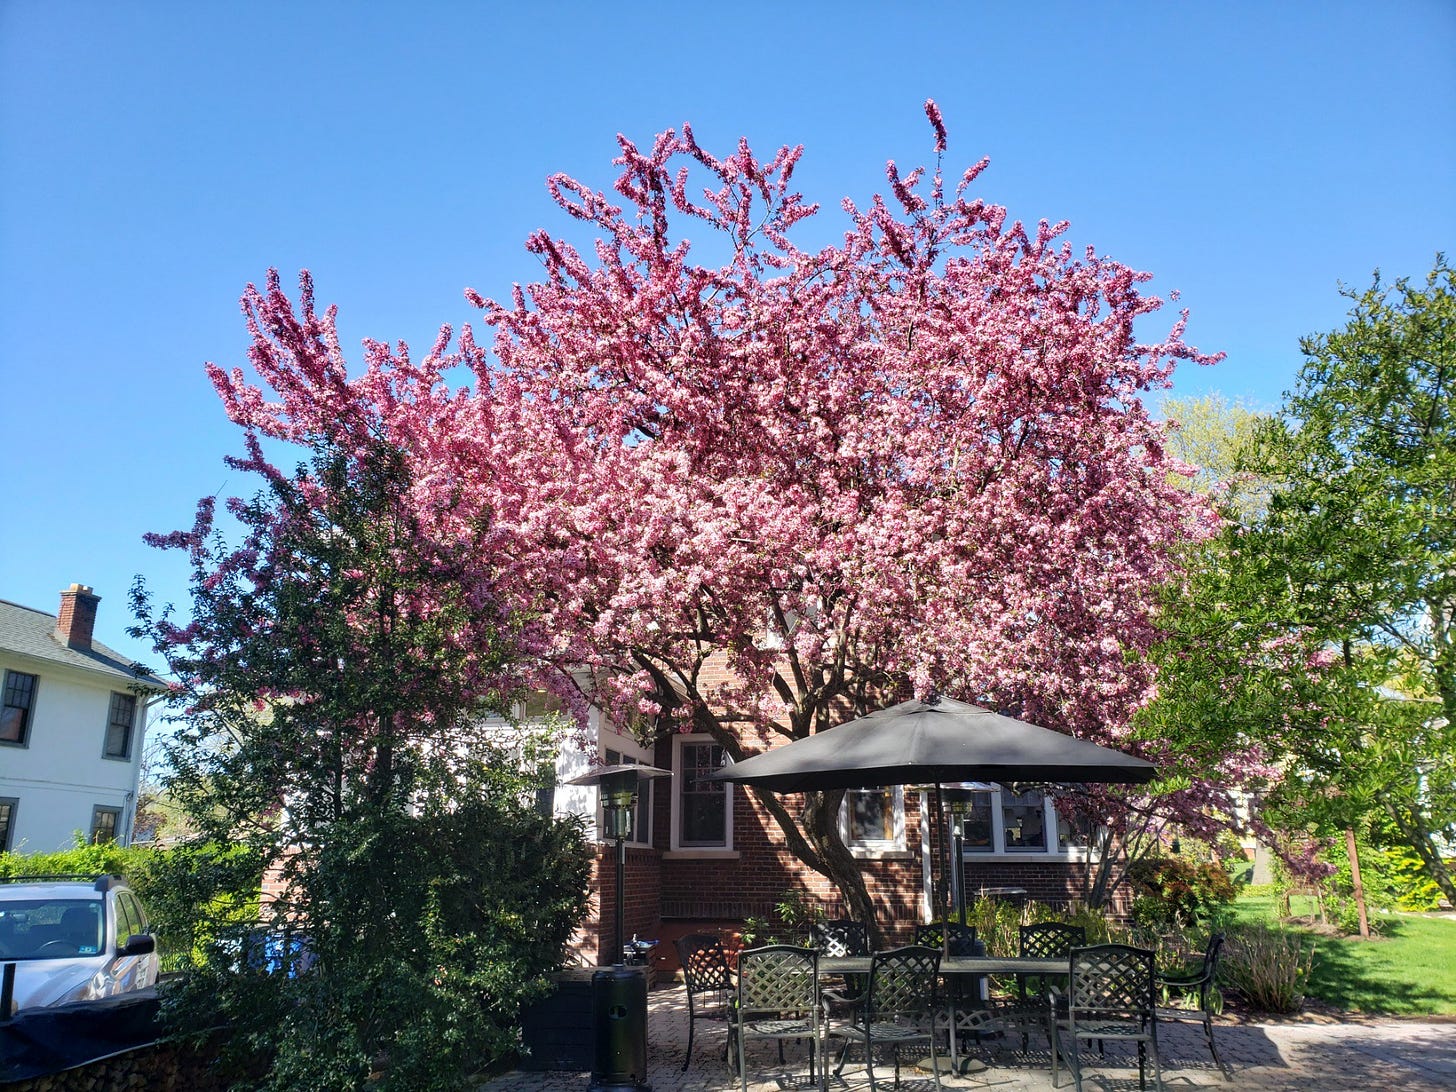 Gloriously bright photo of the flowering pink crabapple tree in Shira's backyard. The sky is a clear tangy blue. 